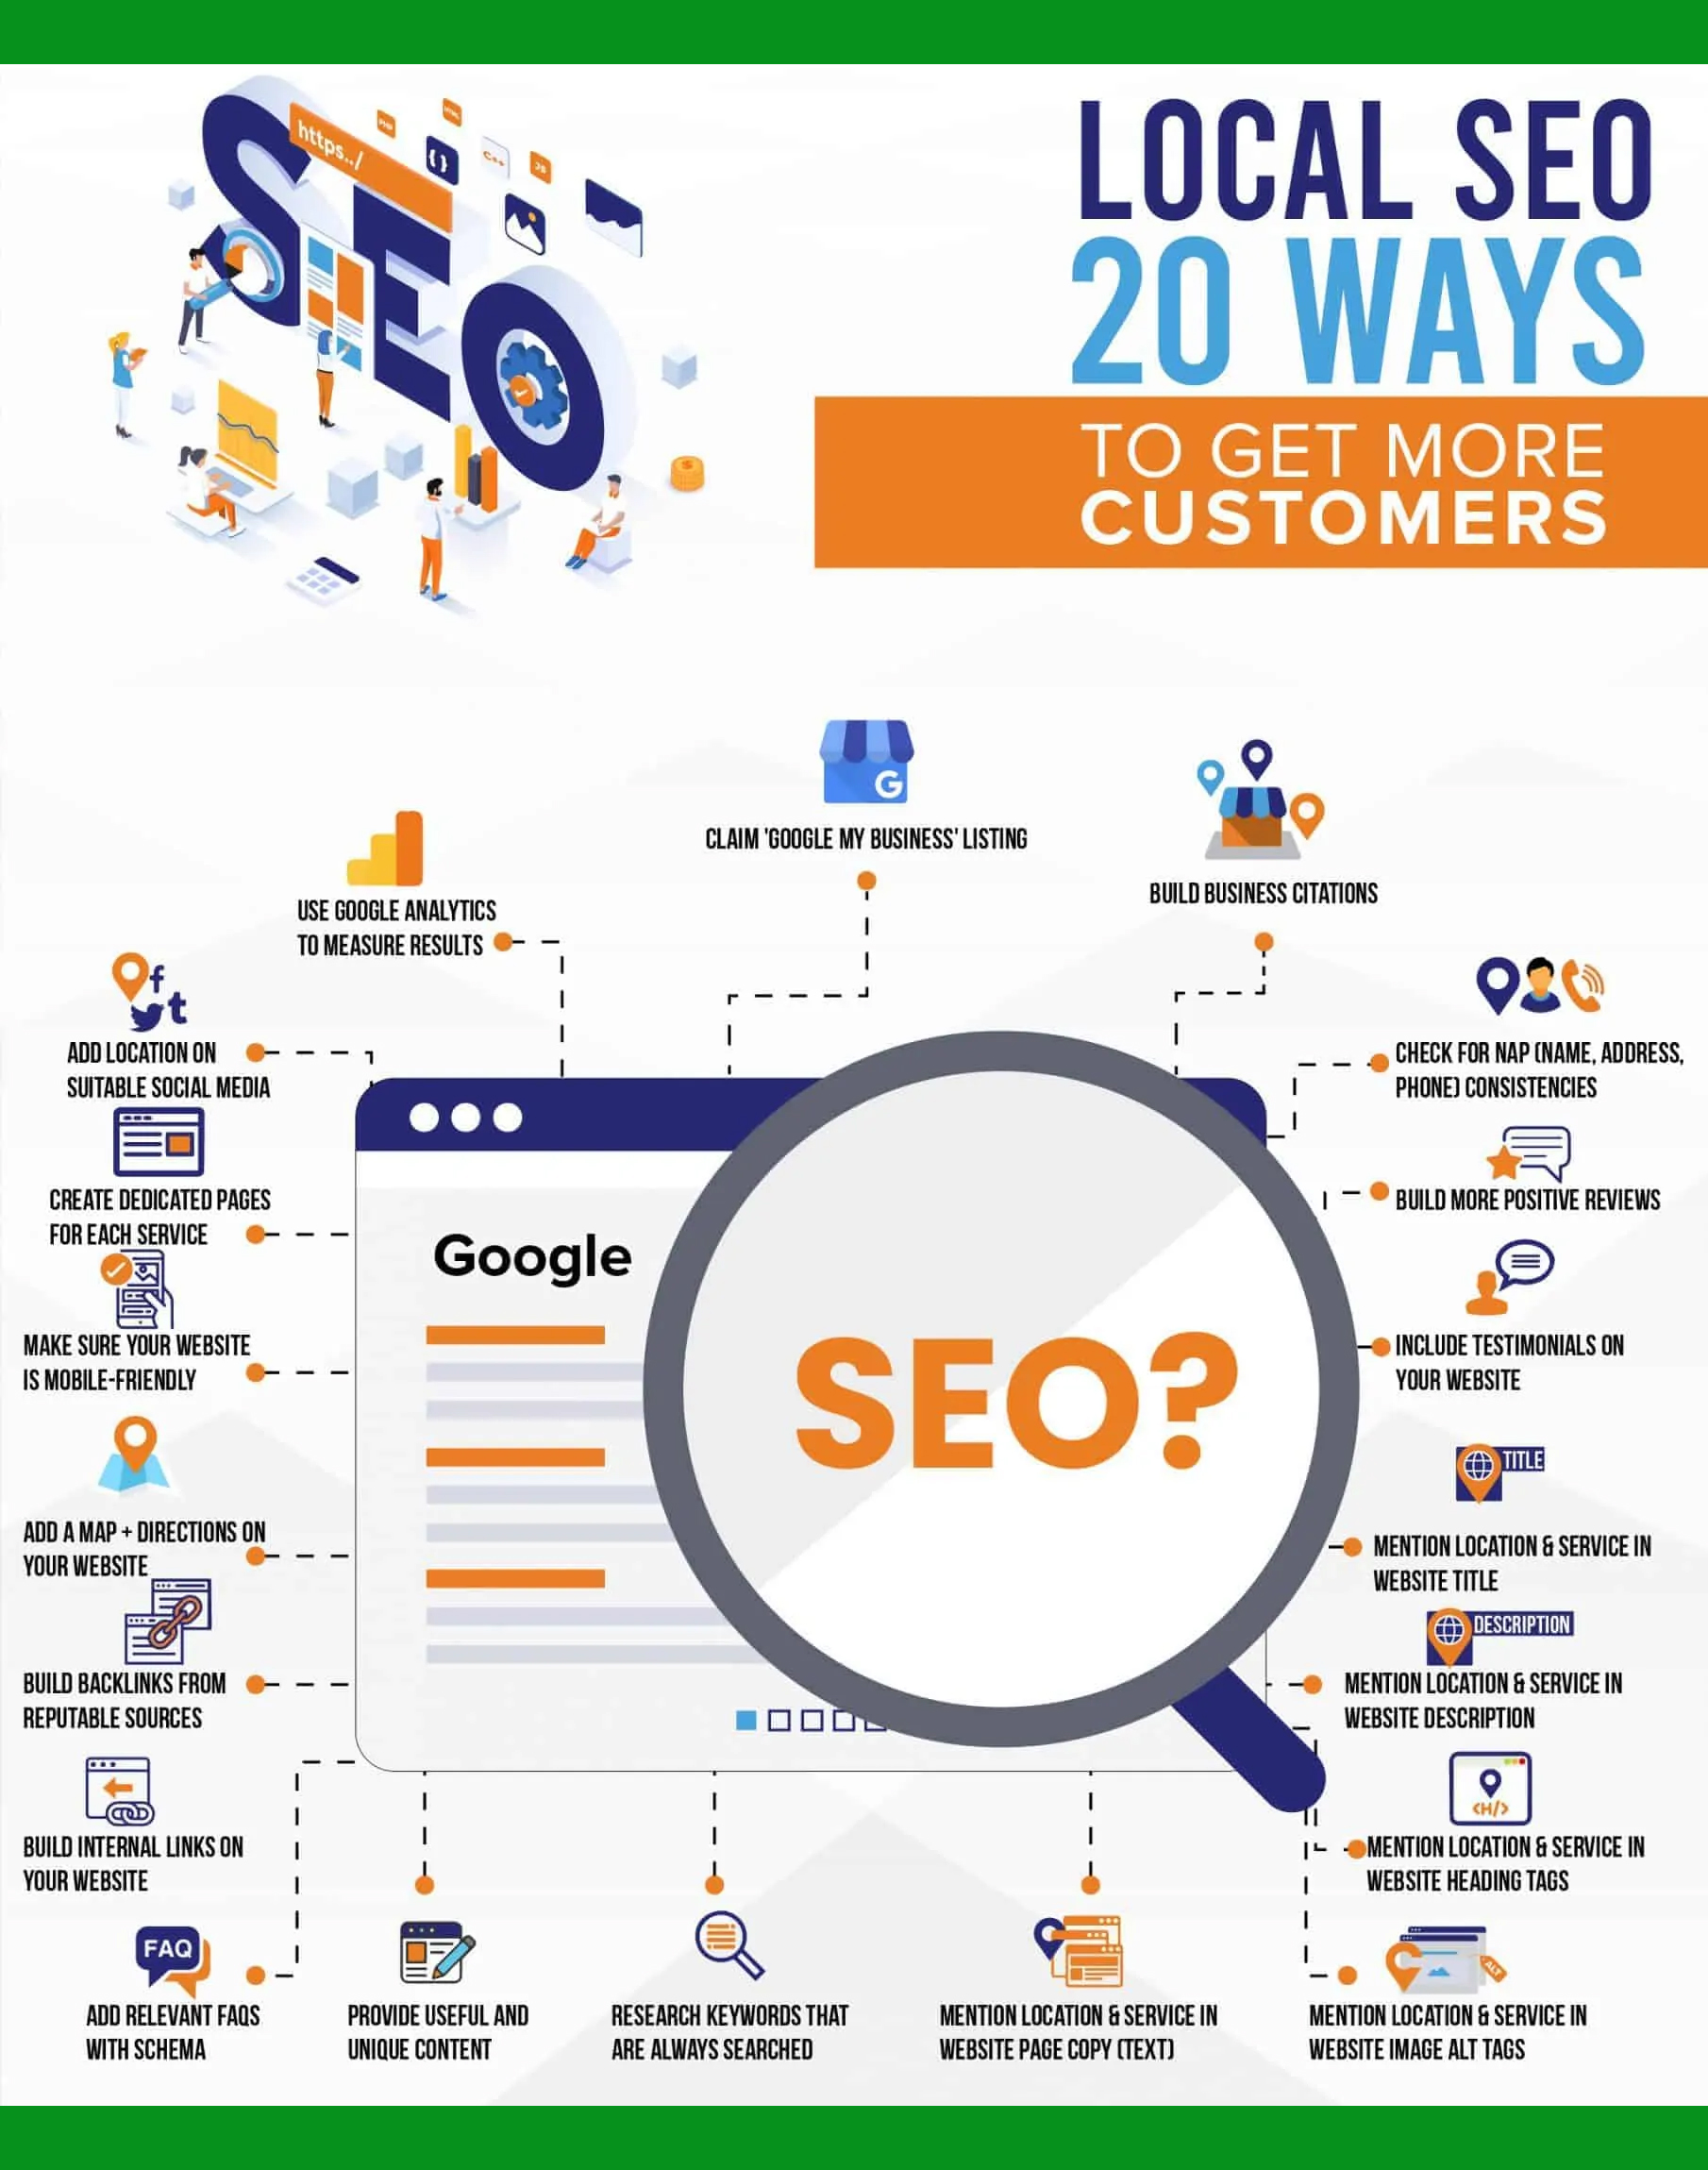 How Does Local SEO Work